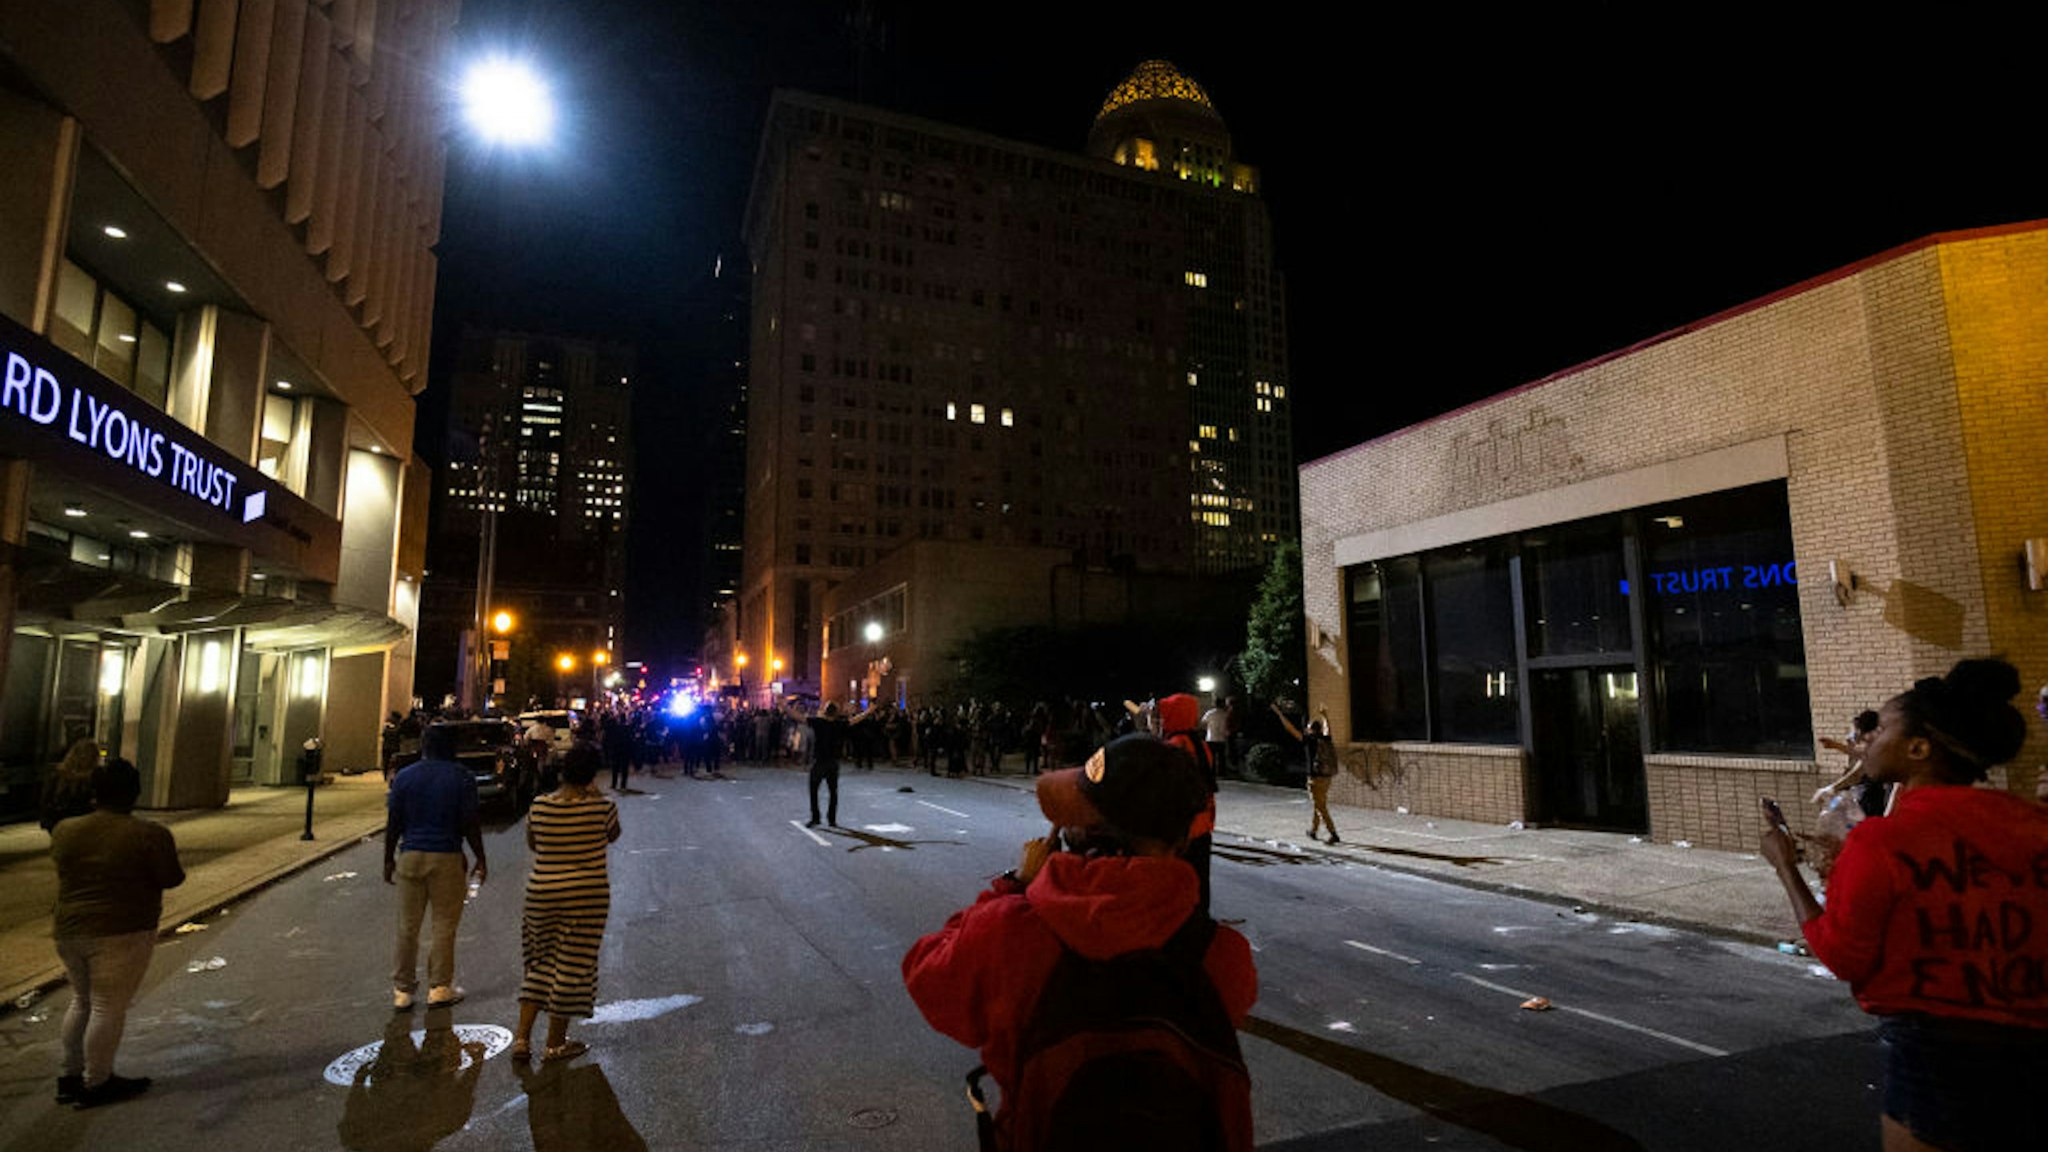 LOUISVILLE, KY - MAY 29: A helicopter illuminates protestors in the street as they walk towards police on May 29, 2020 in Louisville, Kentucky. Protests have erupted after recent police-related incidents resulting in the deaths of African-Americans Breonna Taylor in Louisville and George Floyd in Minneapolis, Minnesota.